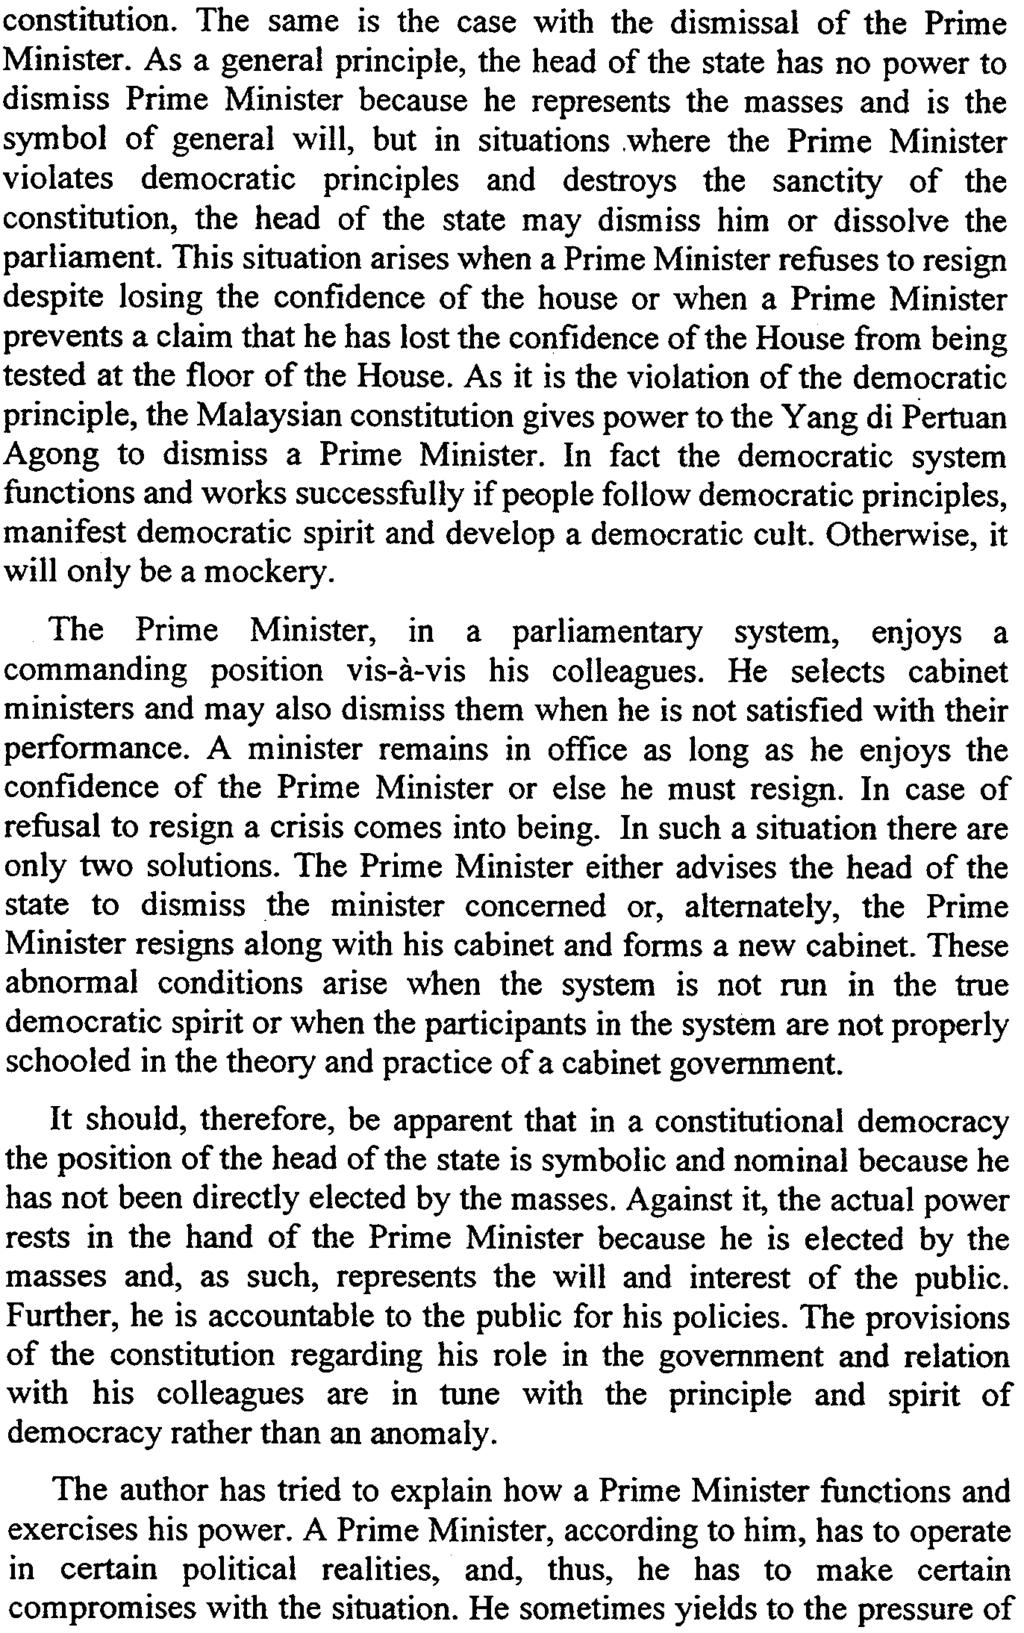 [248] INfELLECTUALDISCOURSE, VOL 8, NO2, 2000 constitution. The same is the case with the dismissal of the Prime Minister.